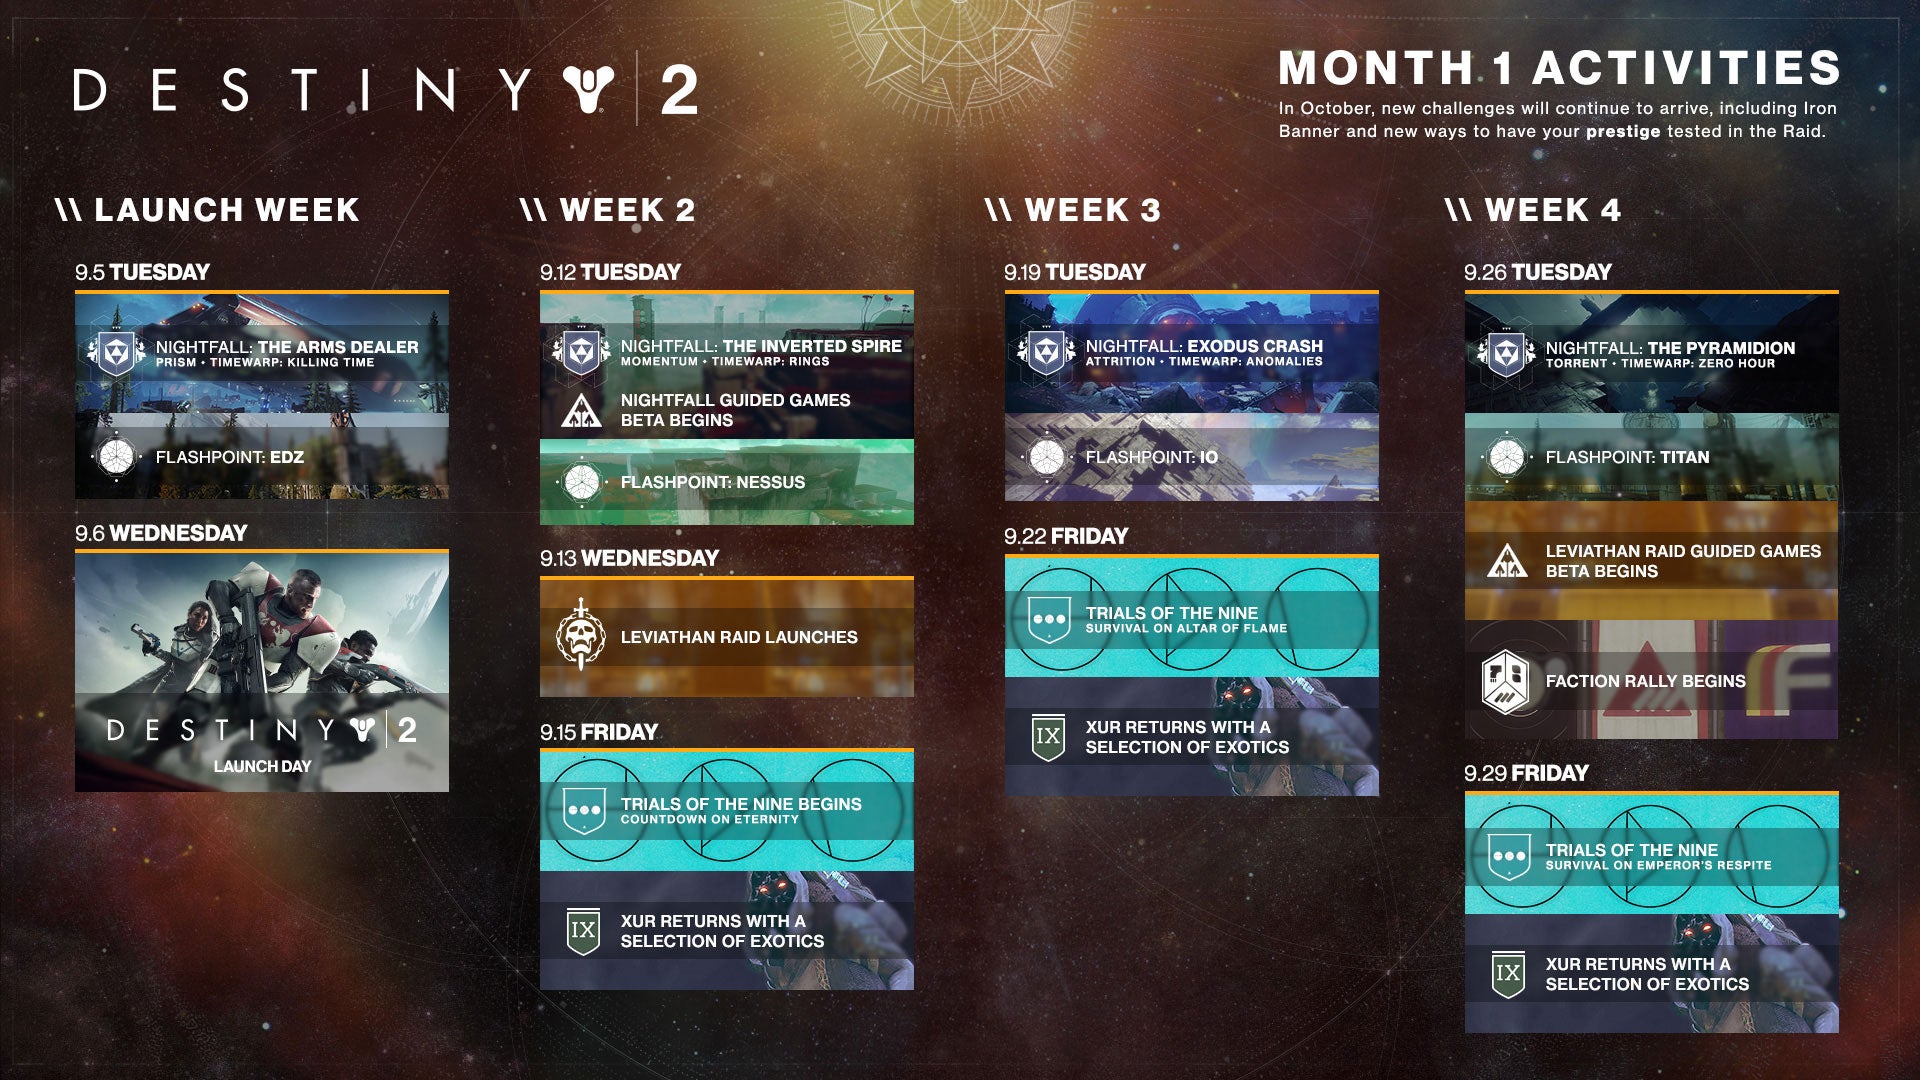 Image for Destiny 2 Month 1 schedule includes Faction Rally, Xur, Guided Games, Trials of the Nine and more